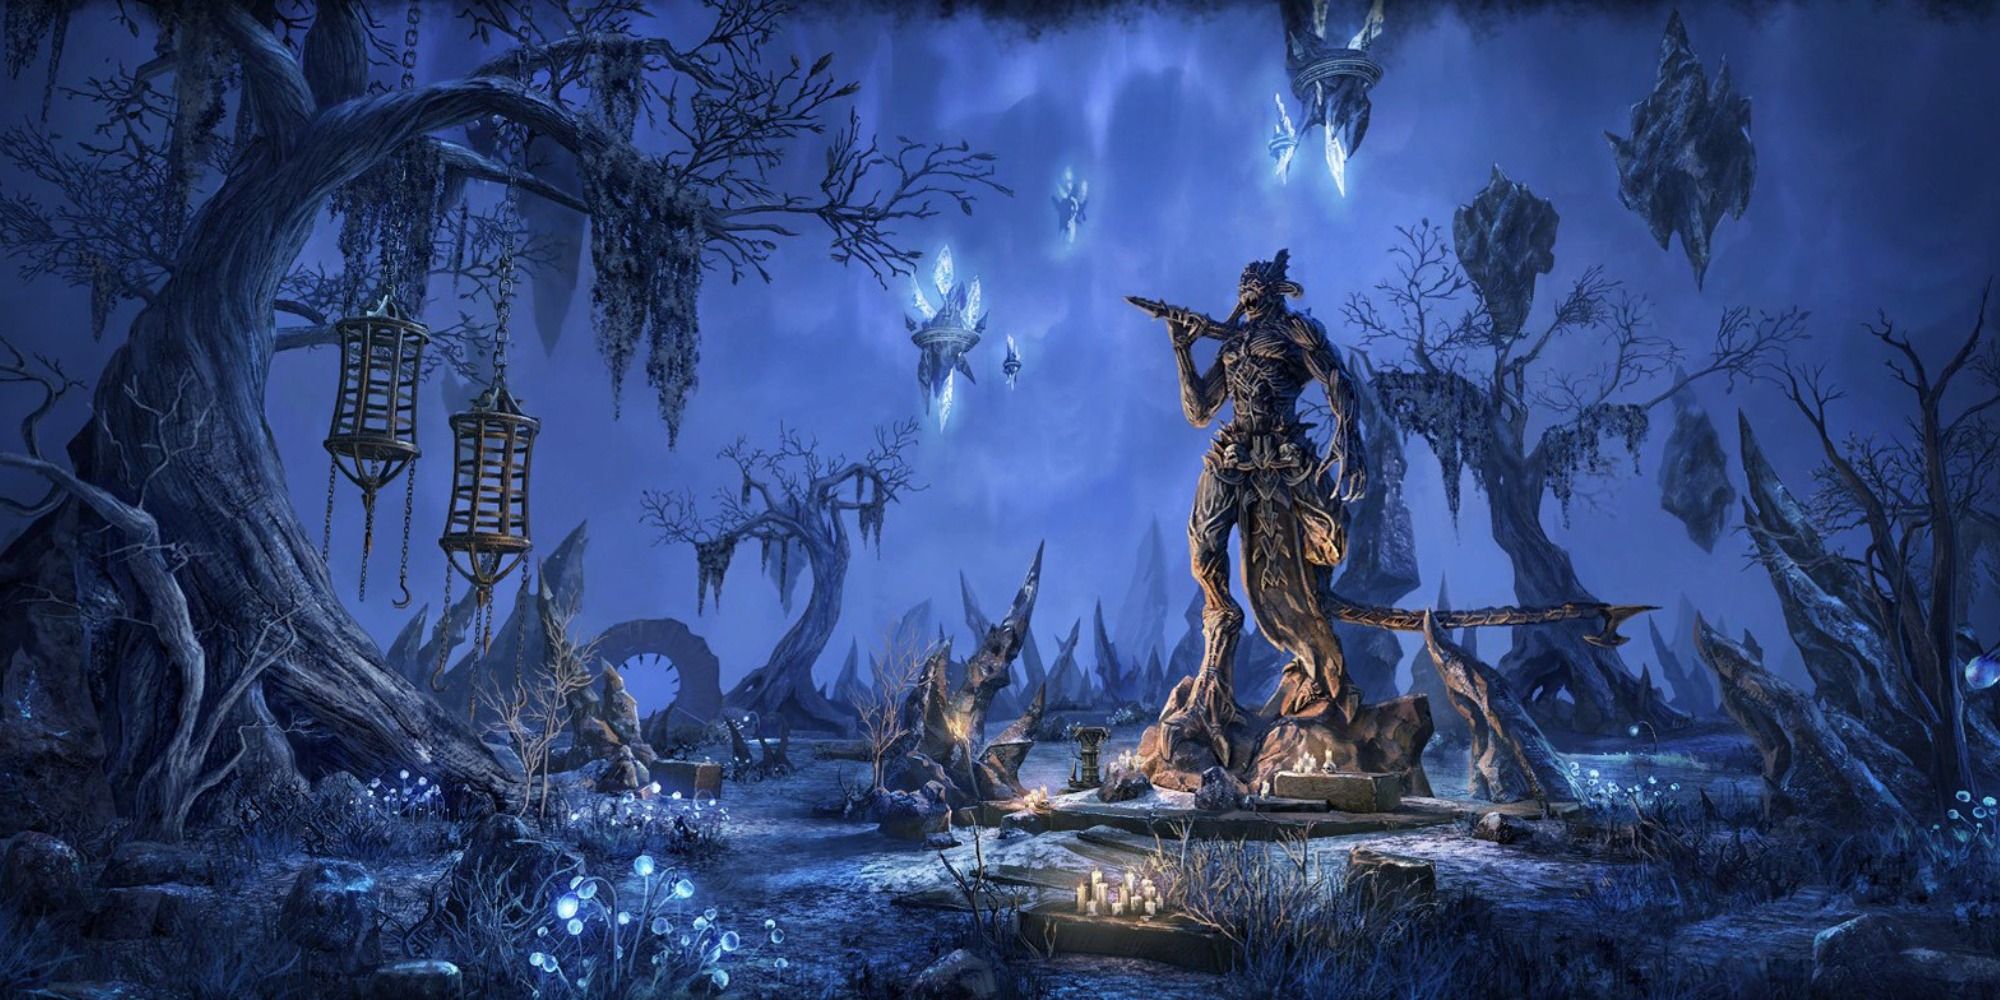 ESO Molag Bal statue in Coldharbour, a blue cavernous region with dead trees and a pale sky